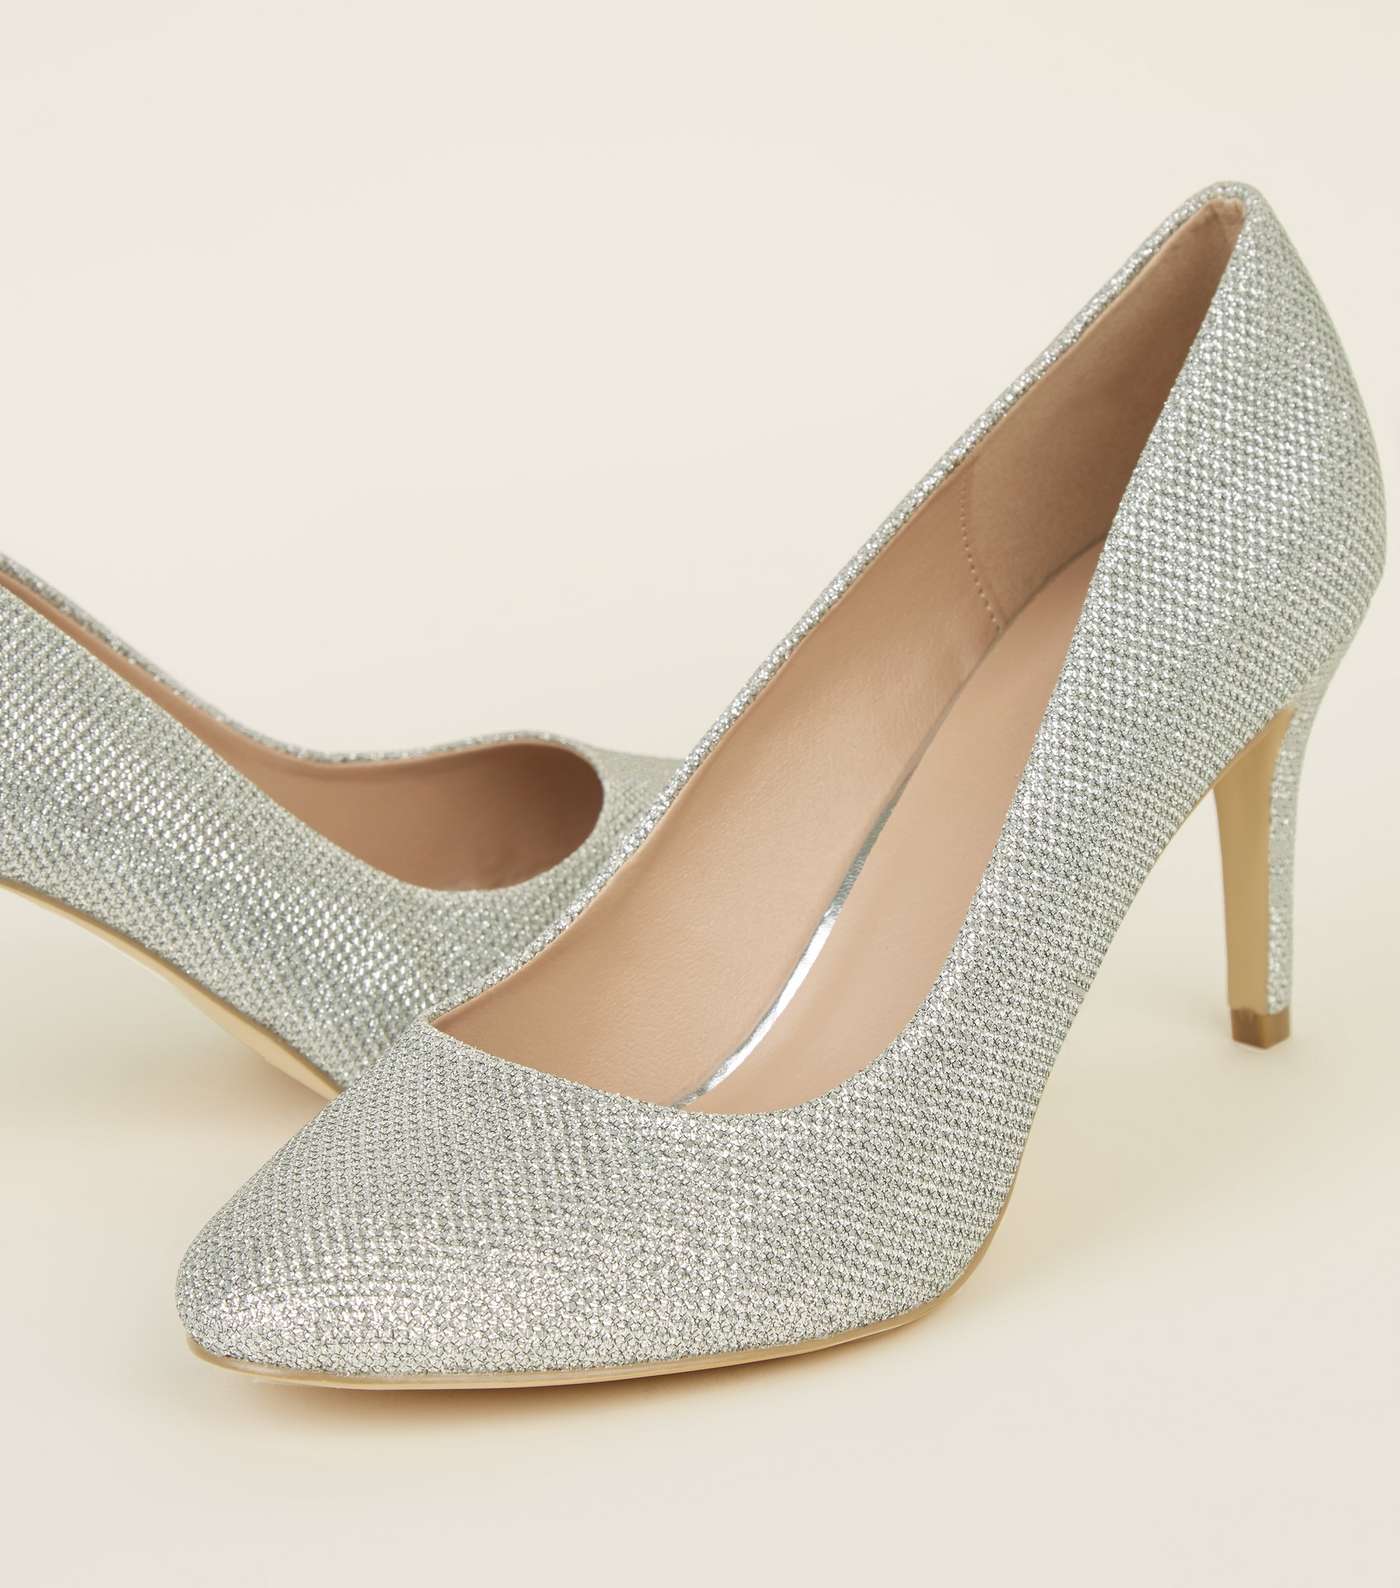 Silver Glitter Mid Heel Court Shoes Image 4